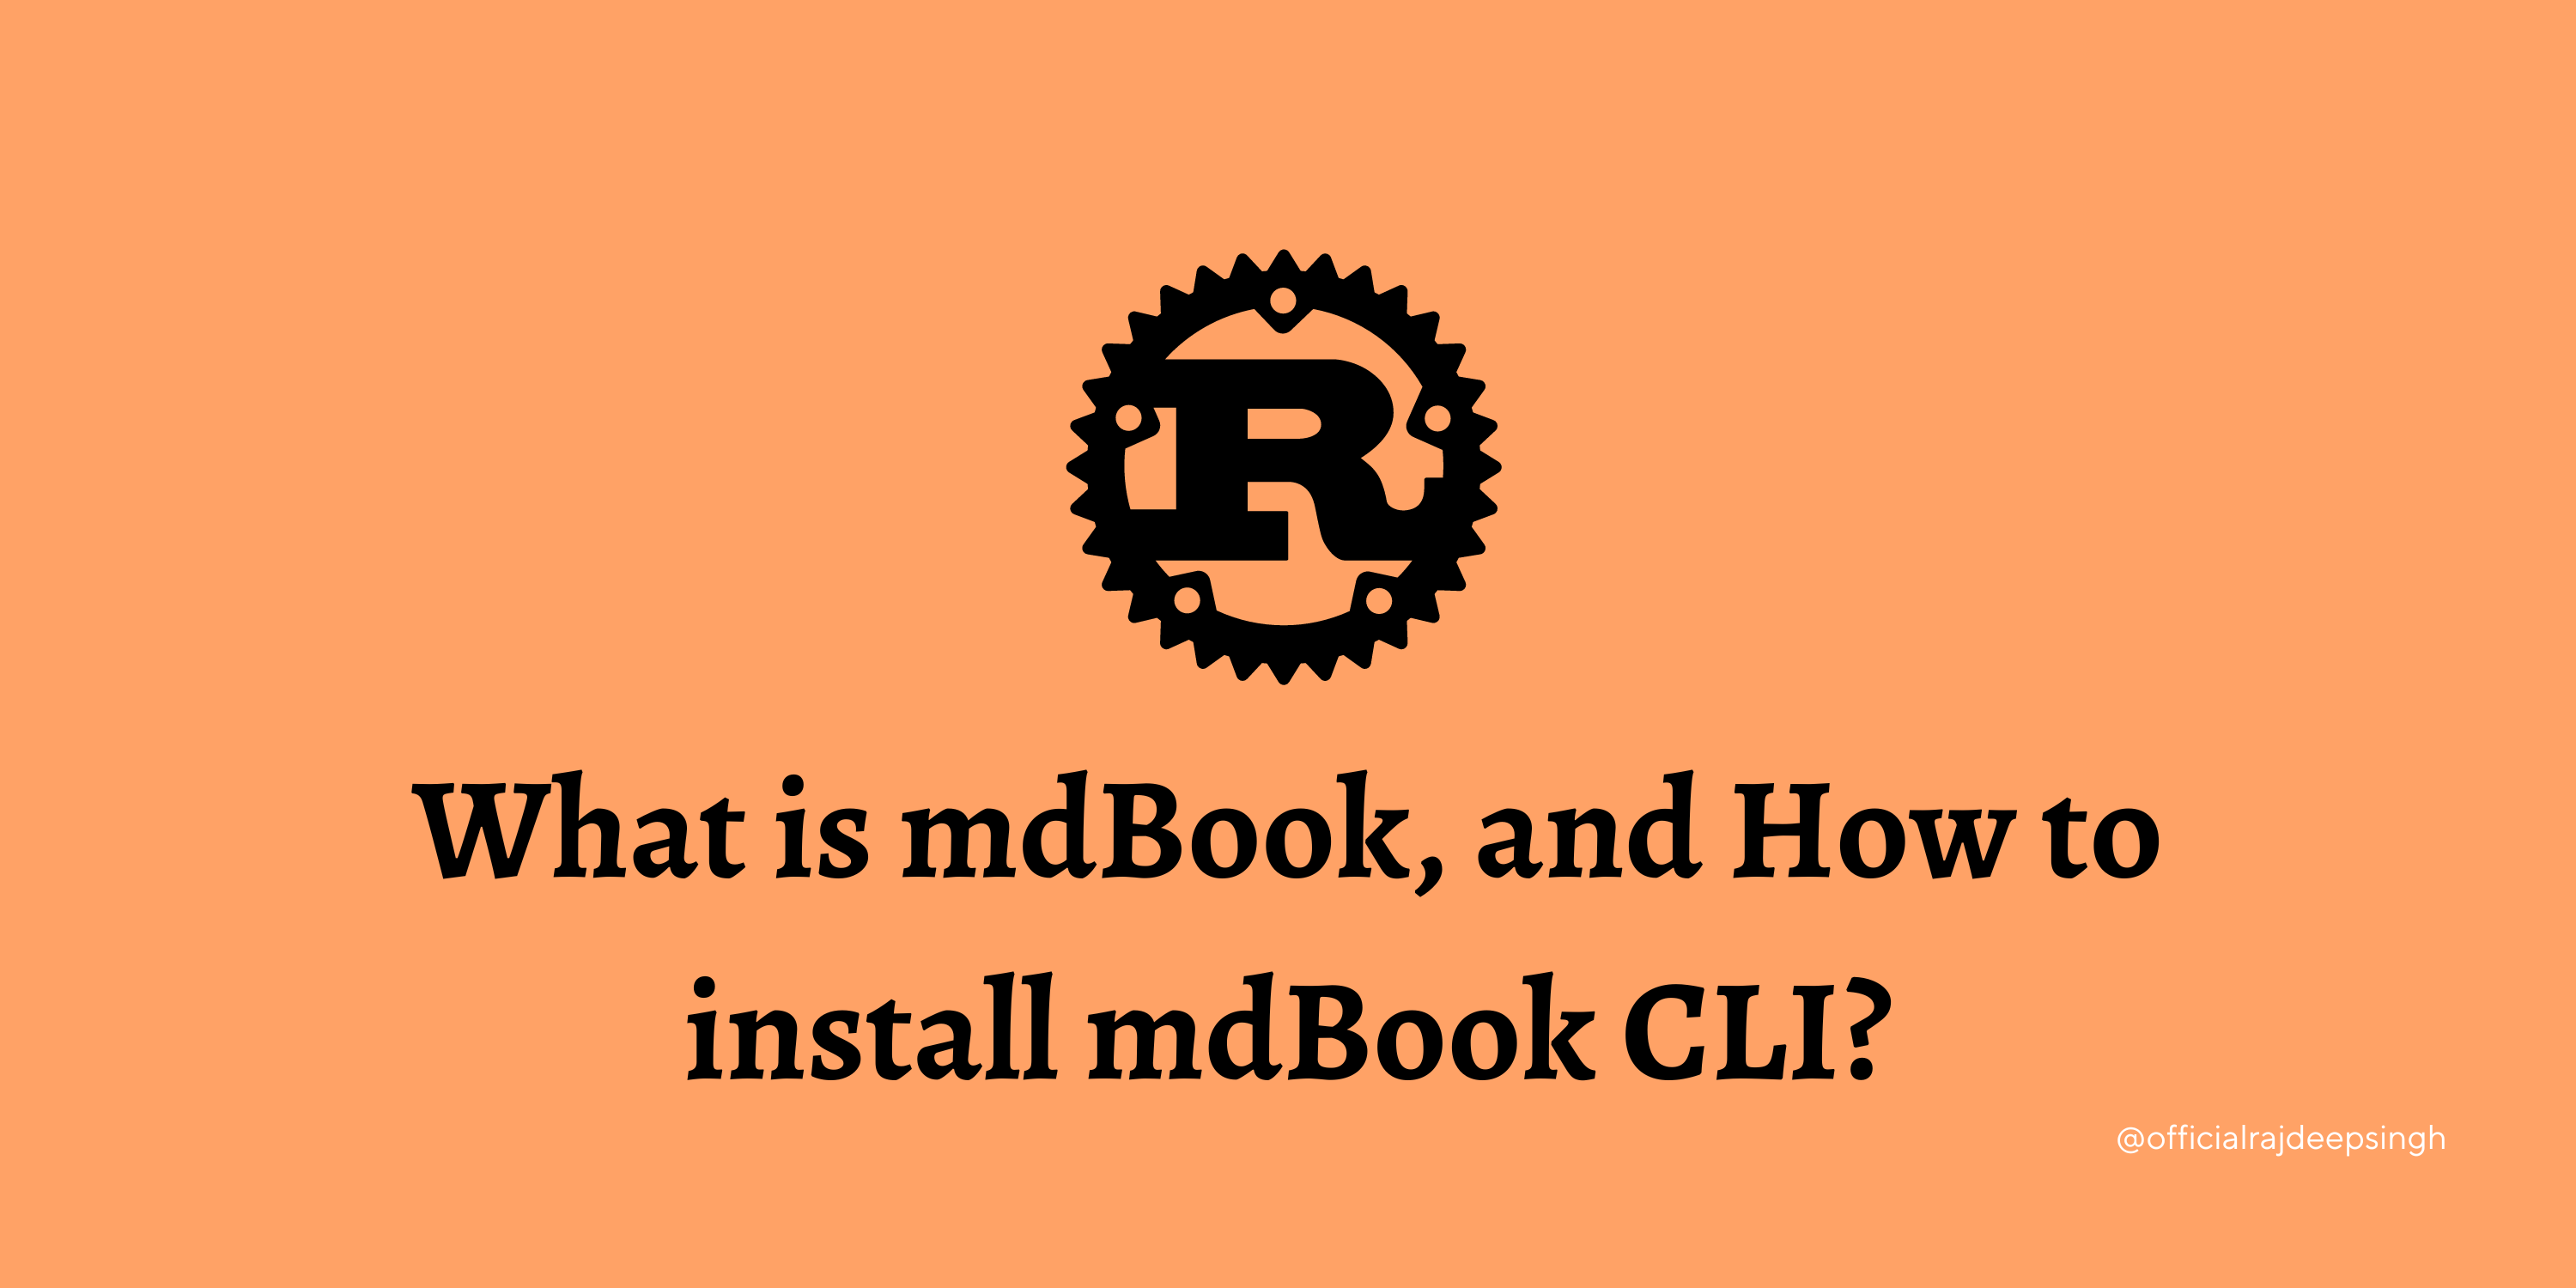 What is mdBook, and How to install mdBook CLI?